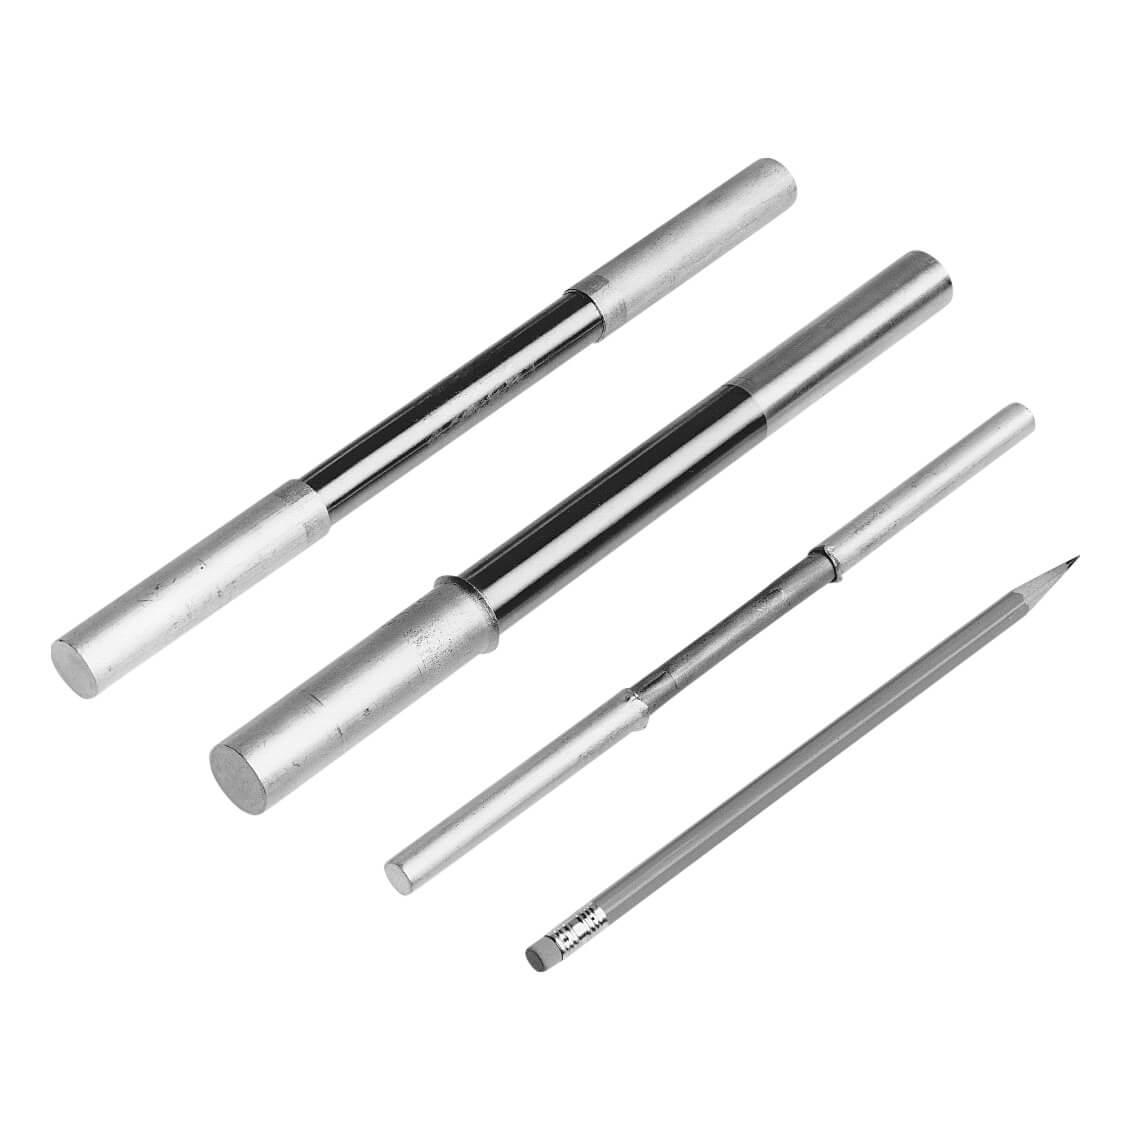 Solid aluminum bar to stainless steel tube